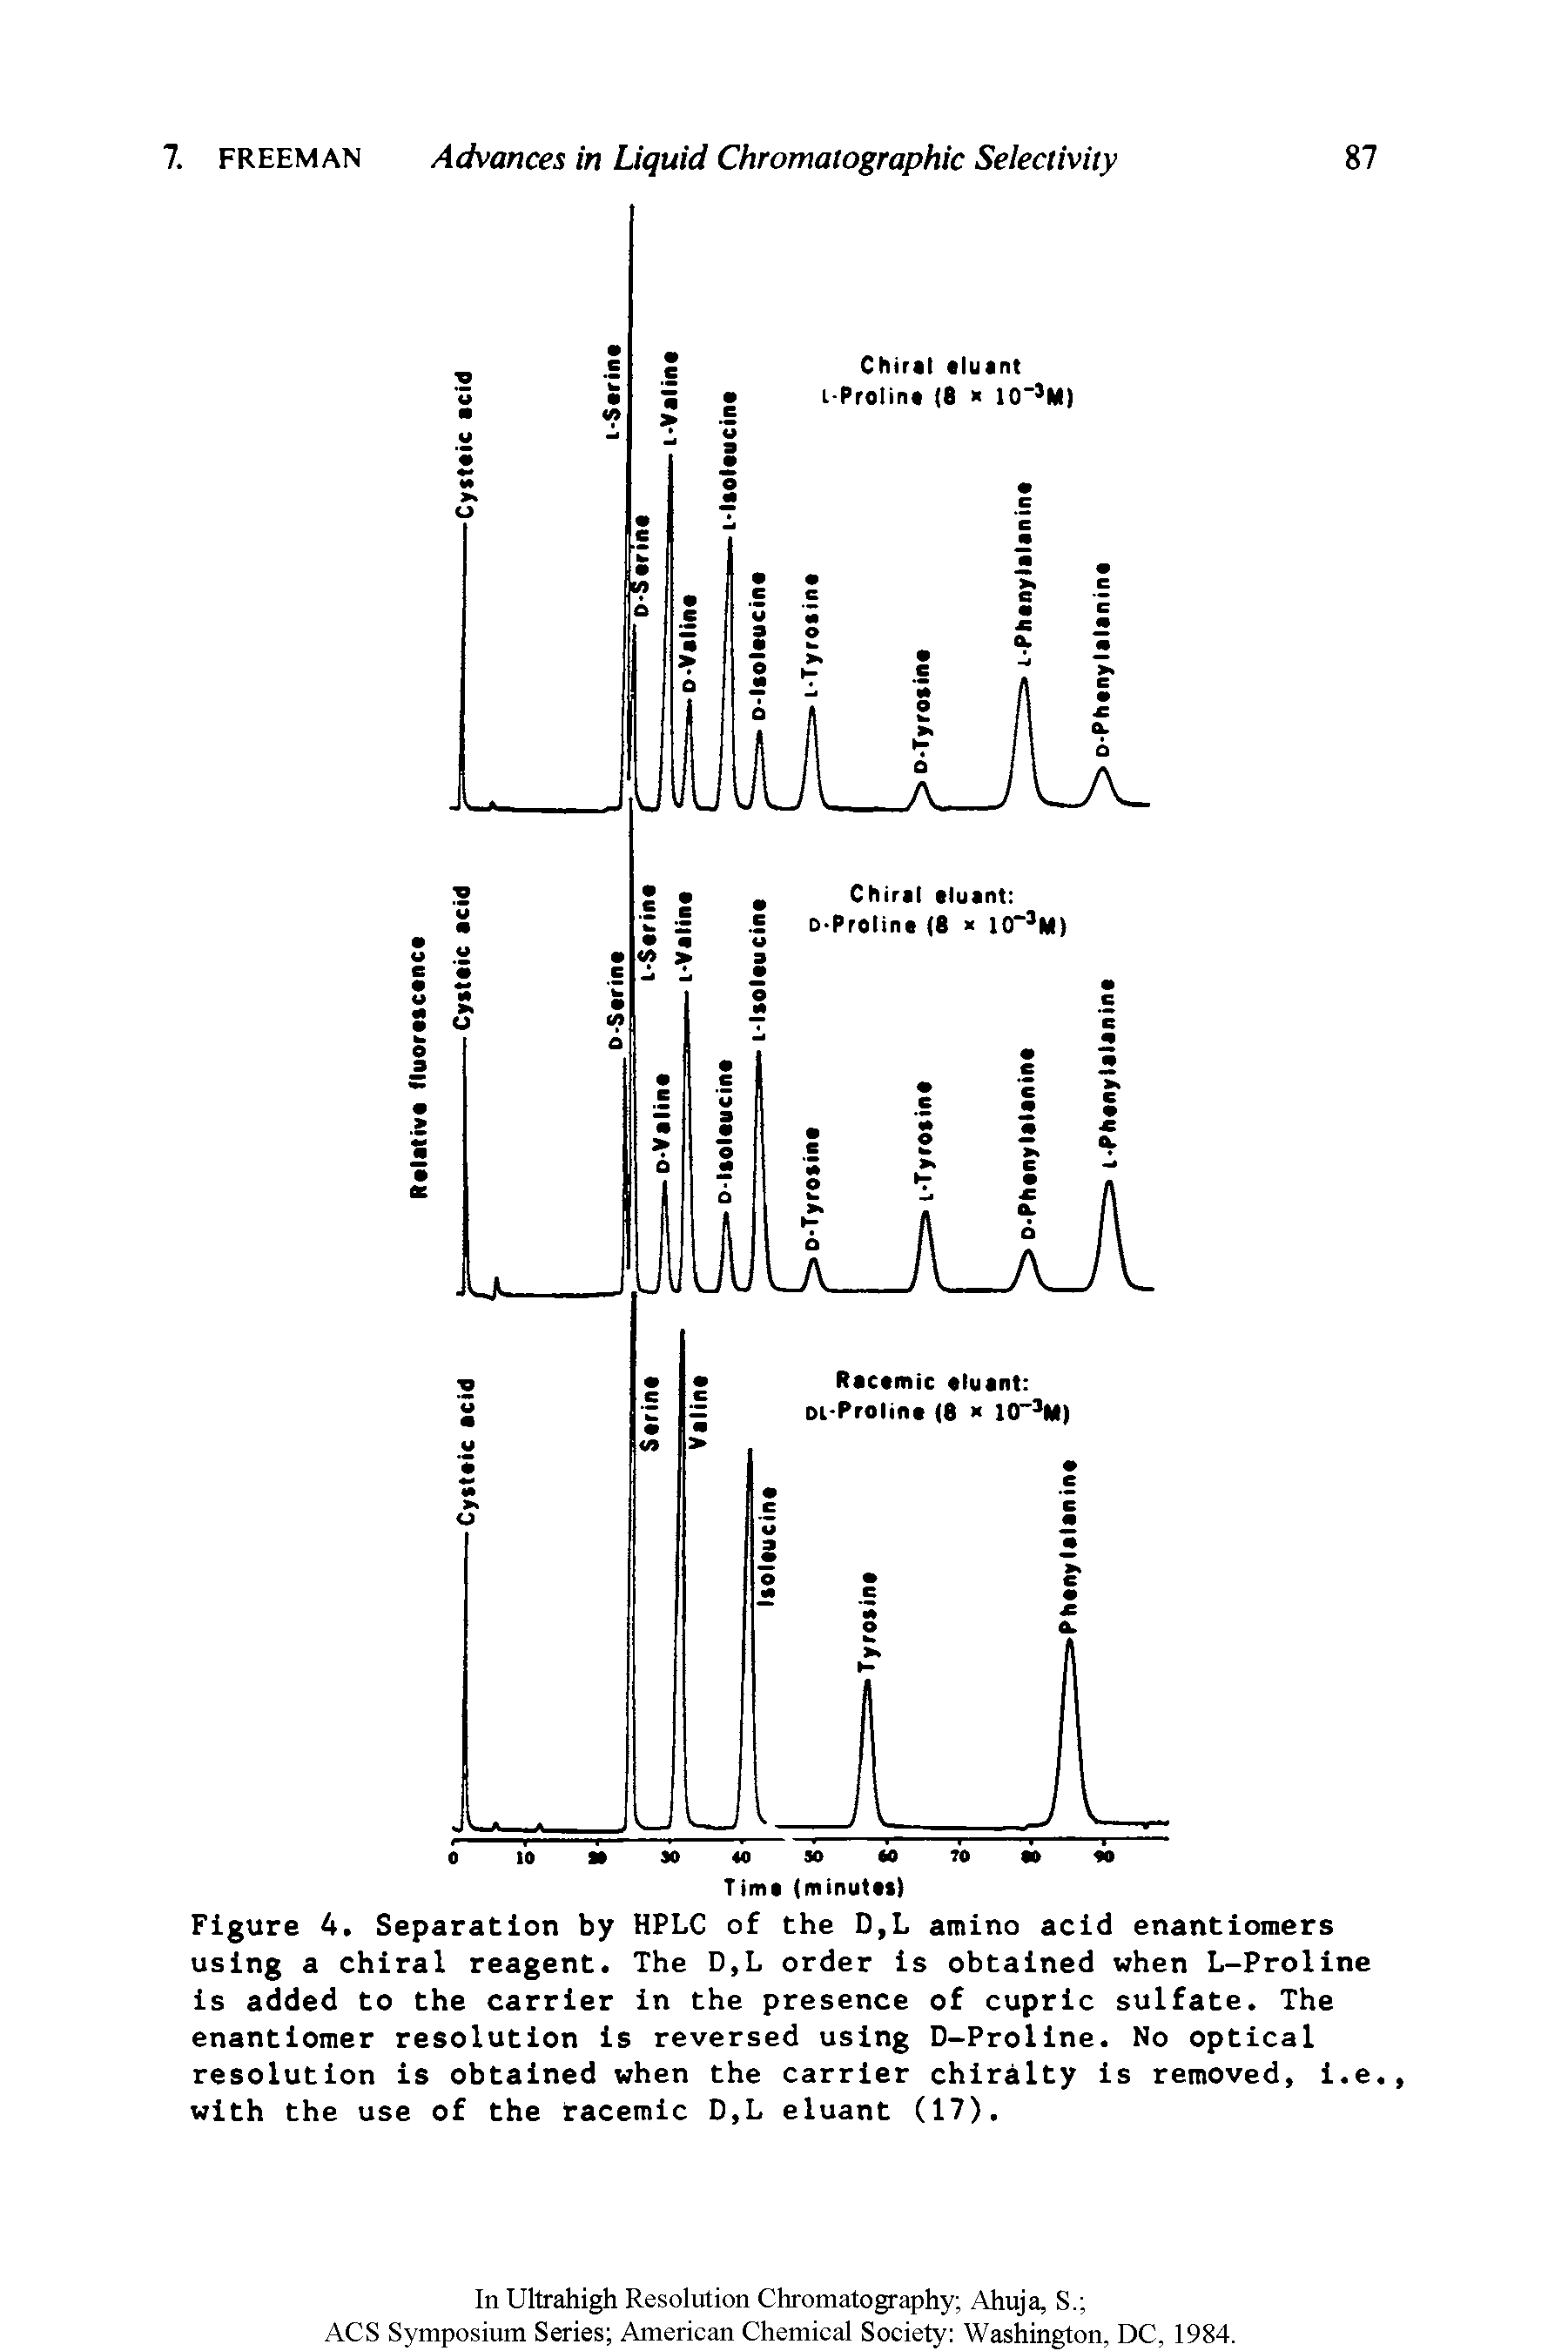 Figure 4. Separation by HPLC of the D,L amino acid enantiomers using a chiral reagent. The D,L order Is obtained when L-Prollne Is added to the carrier In the presence of cupric sulfate. The enantiomer resolution Is reversed using D-Prollne. No optical resolution Is obtained when the carrier chlralty Is removed, l.e. with the use of the racemic D,L eluant (17).